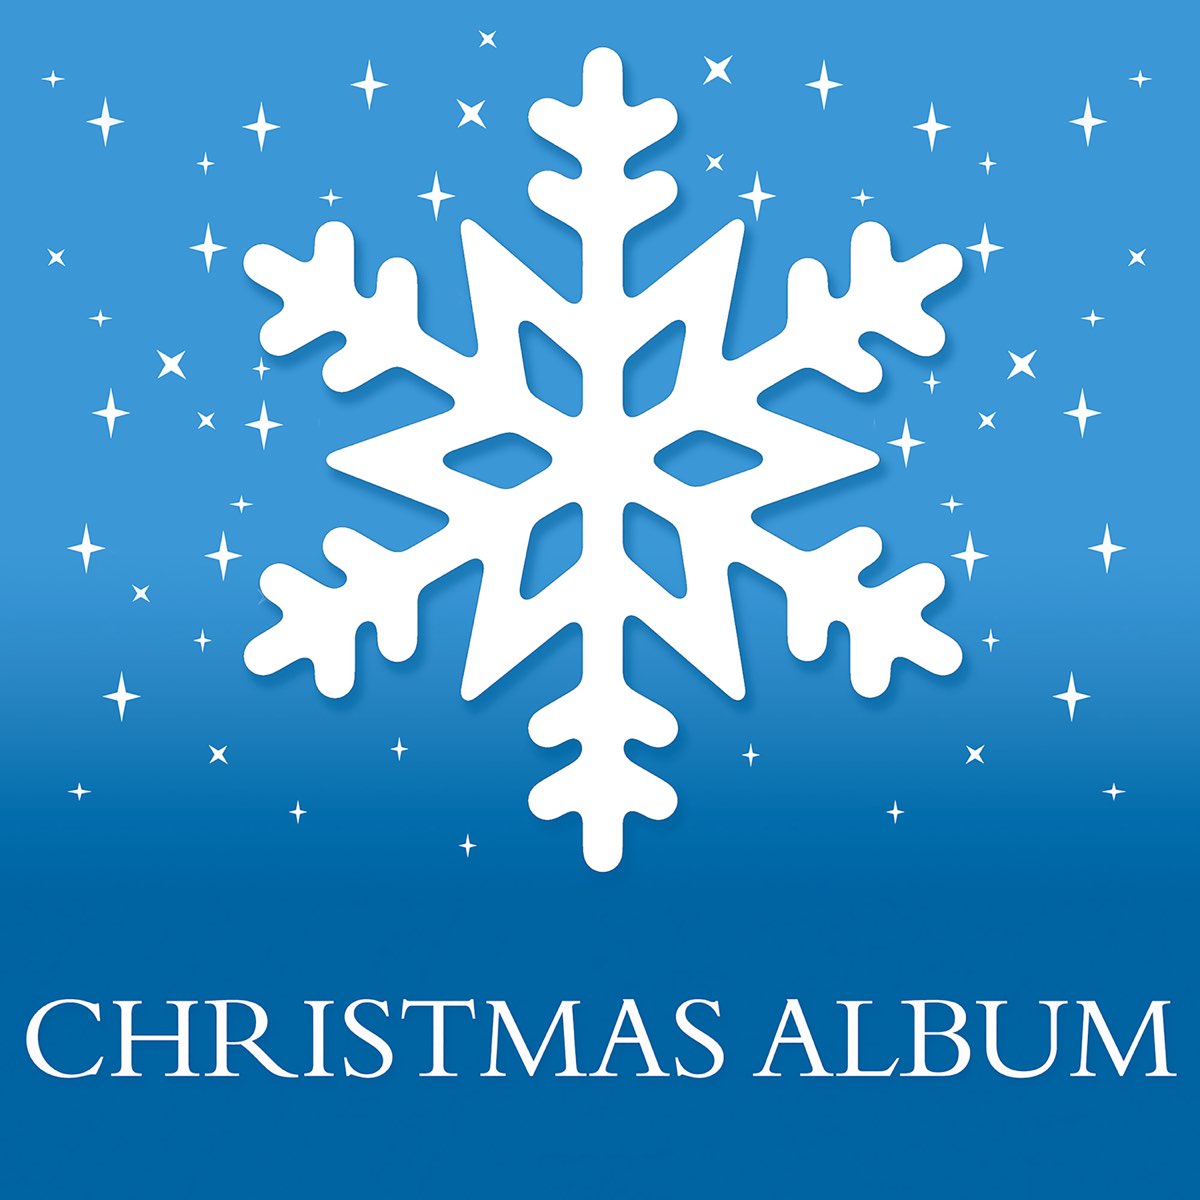 14 New Christmas Albums Coming Out in 2019 - Best Christmas Albums 2019